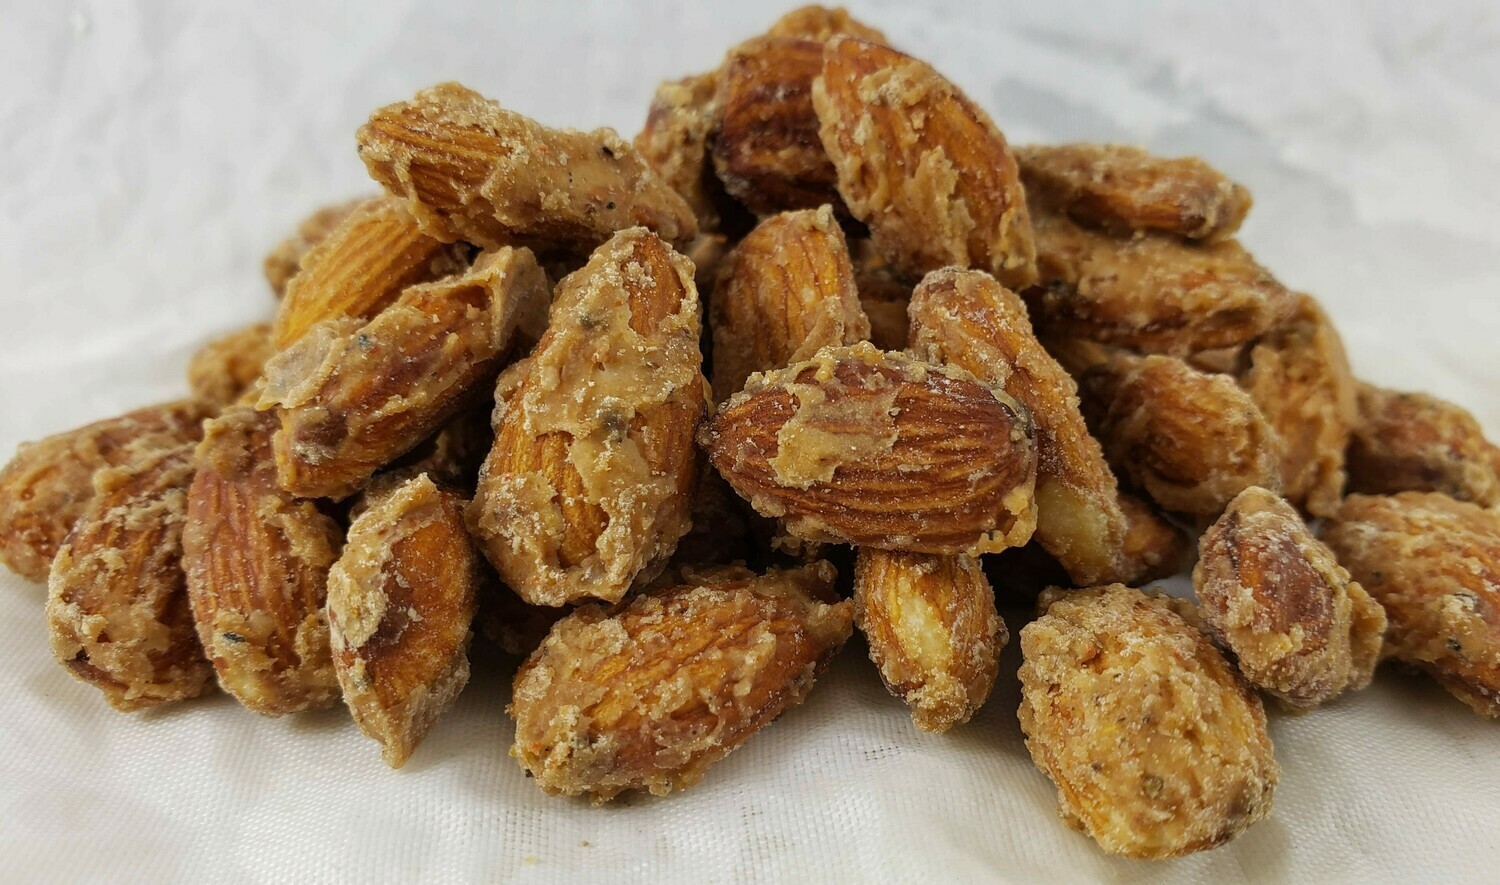 Cayenne Candied Almonds, 4.0 ounces